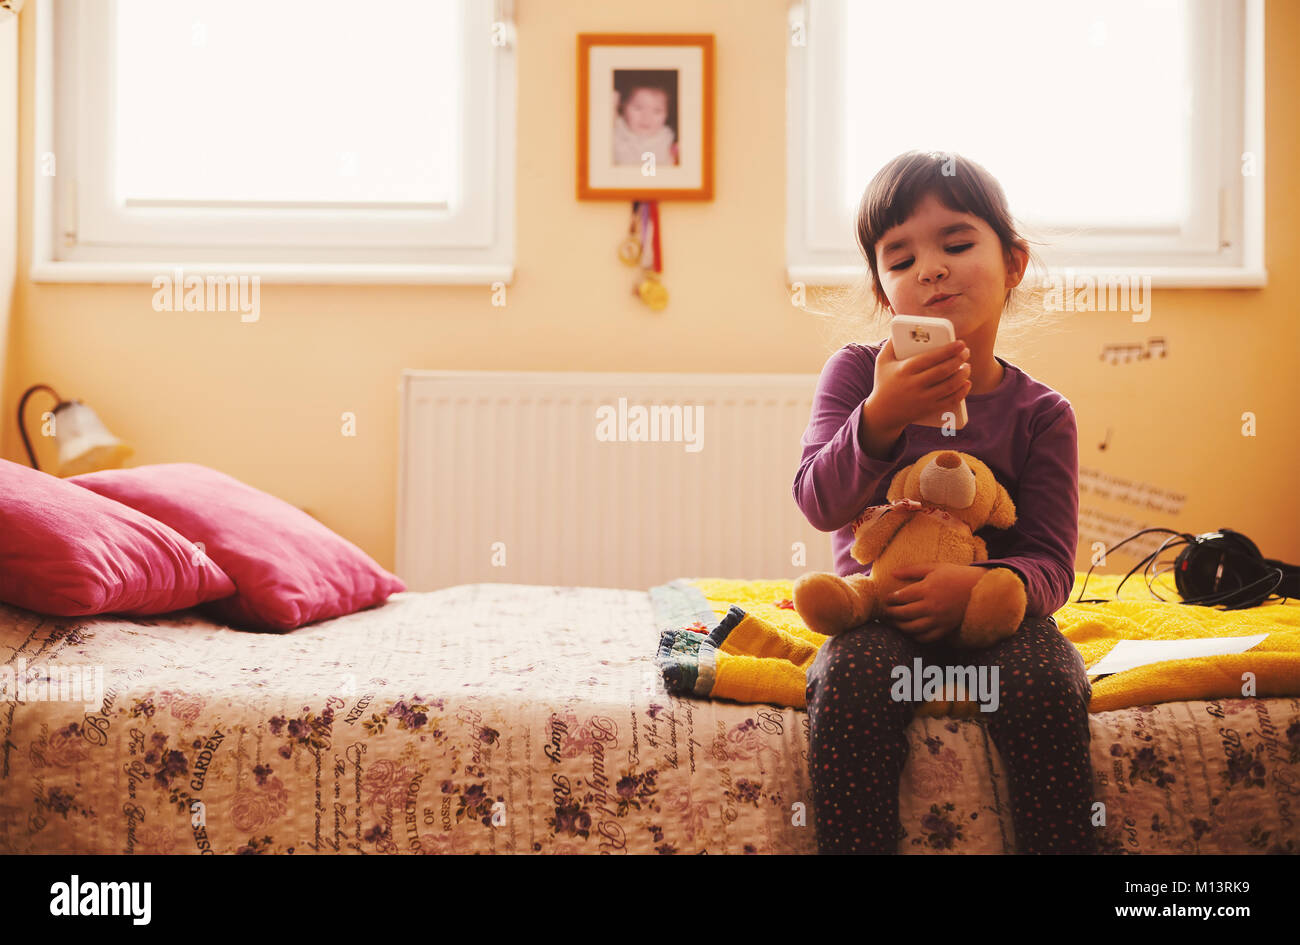 Small girl and bear toy playing and posing. Stock Photo